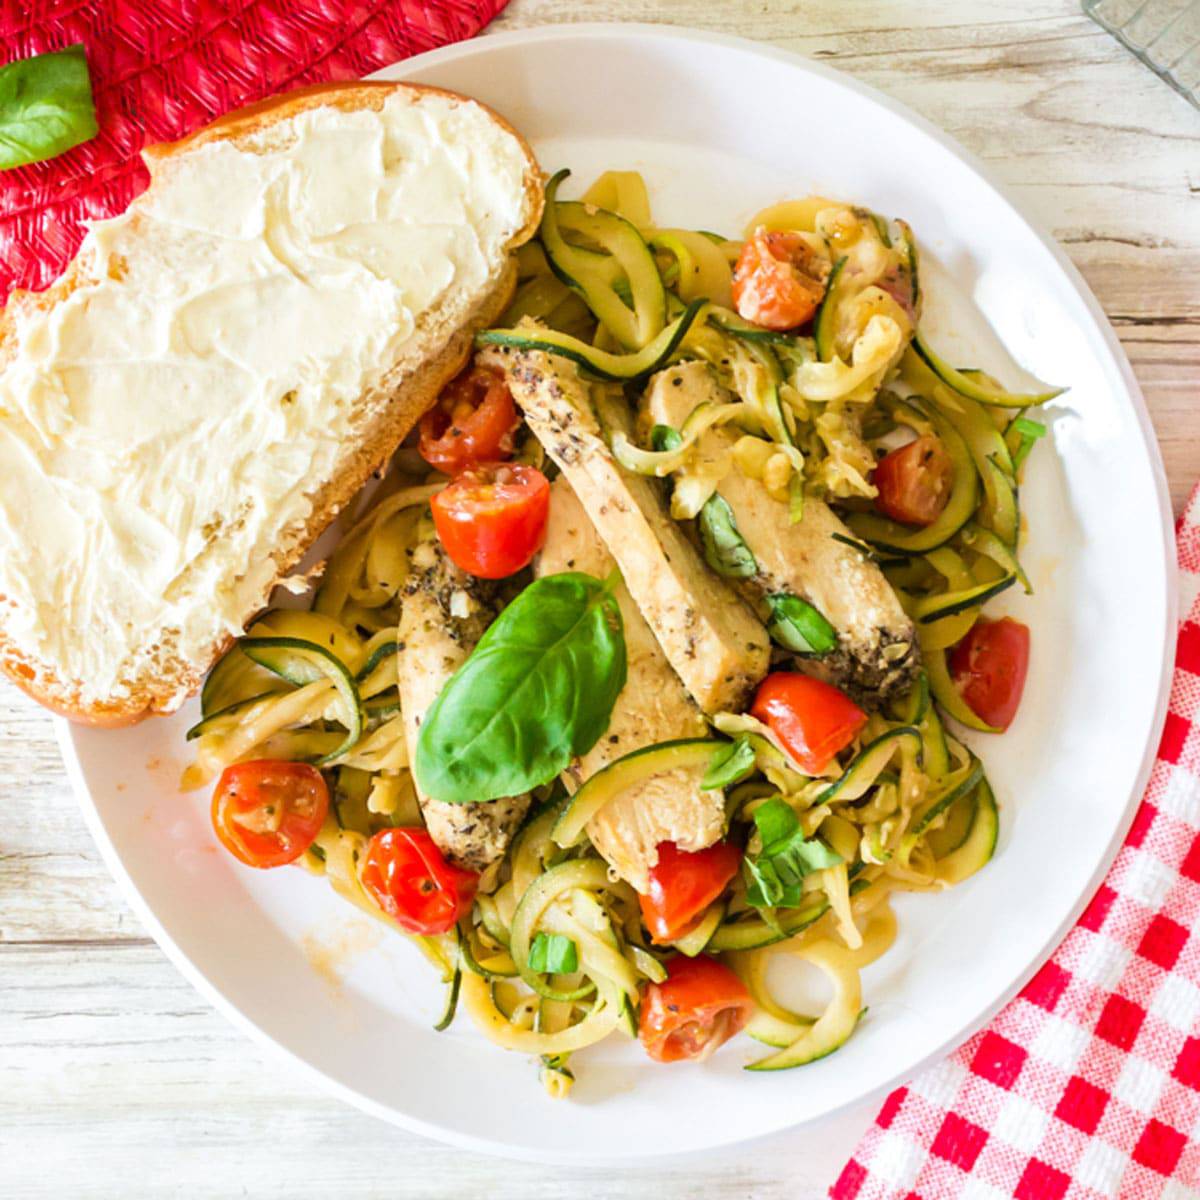 Plate of zucchini noodles with a slice of bread.